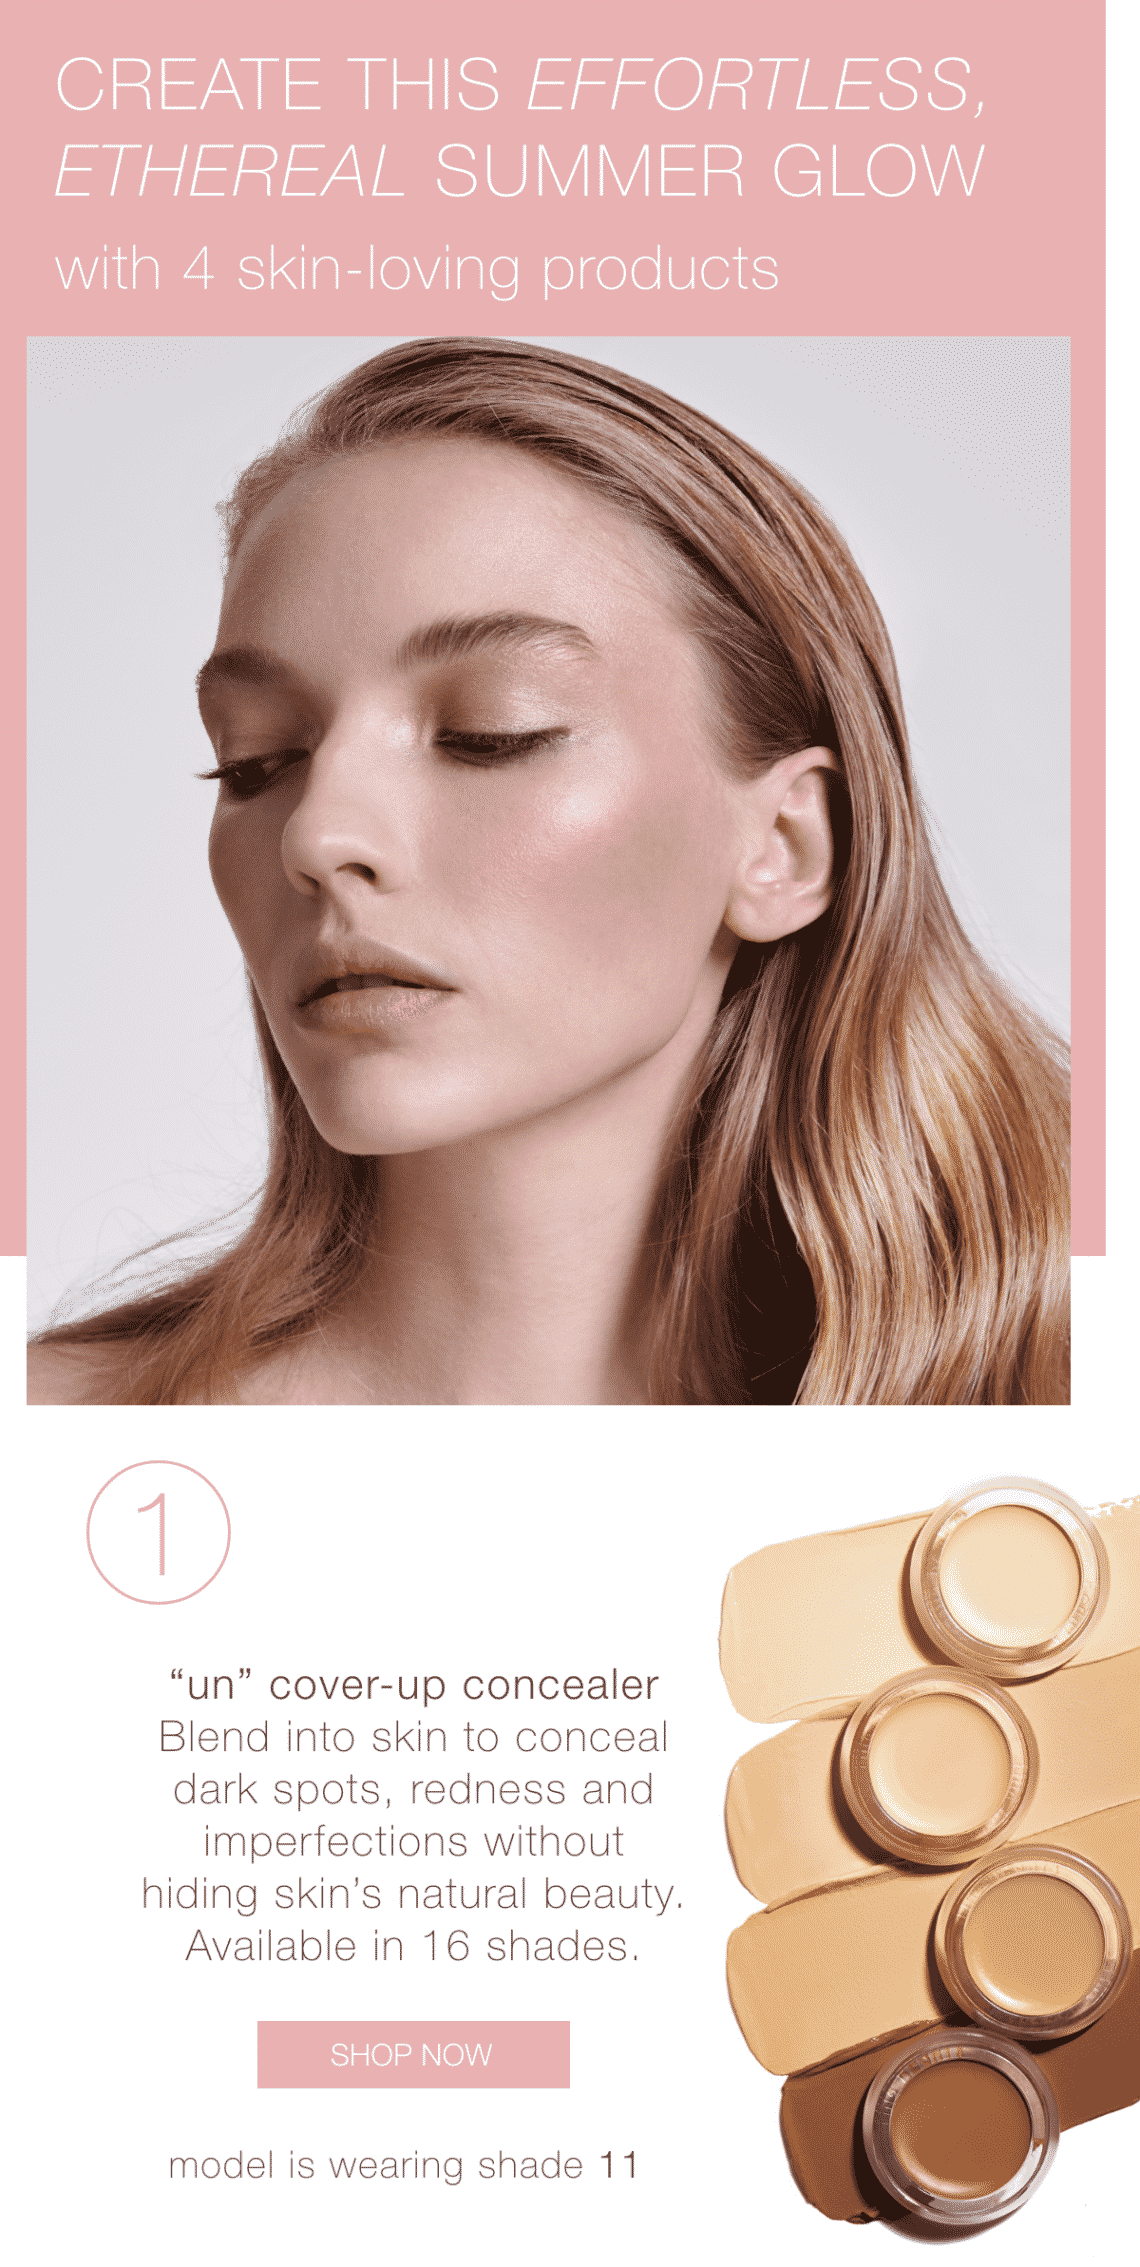 Beauy products for an effortless summer glow